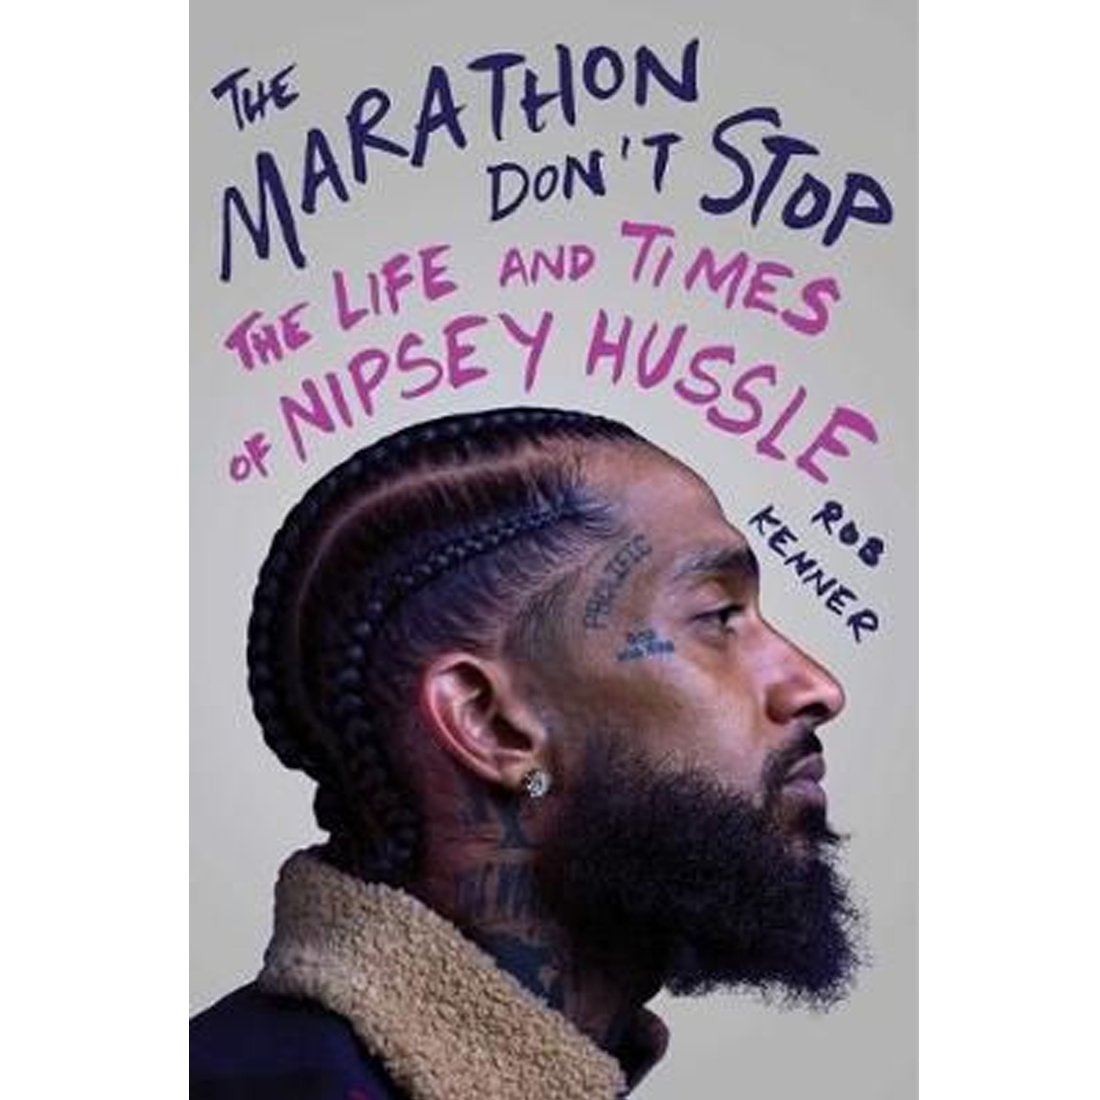 The Marathon Don't Stop - The Life and Times of Nipsey Hussle: Book